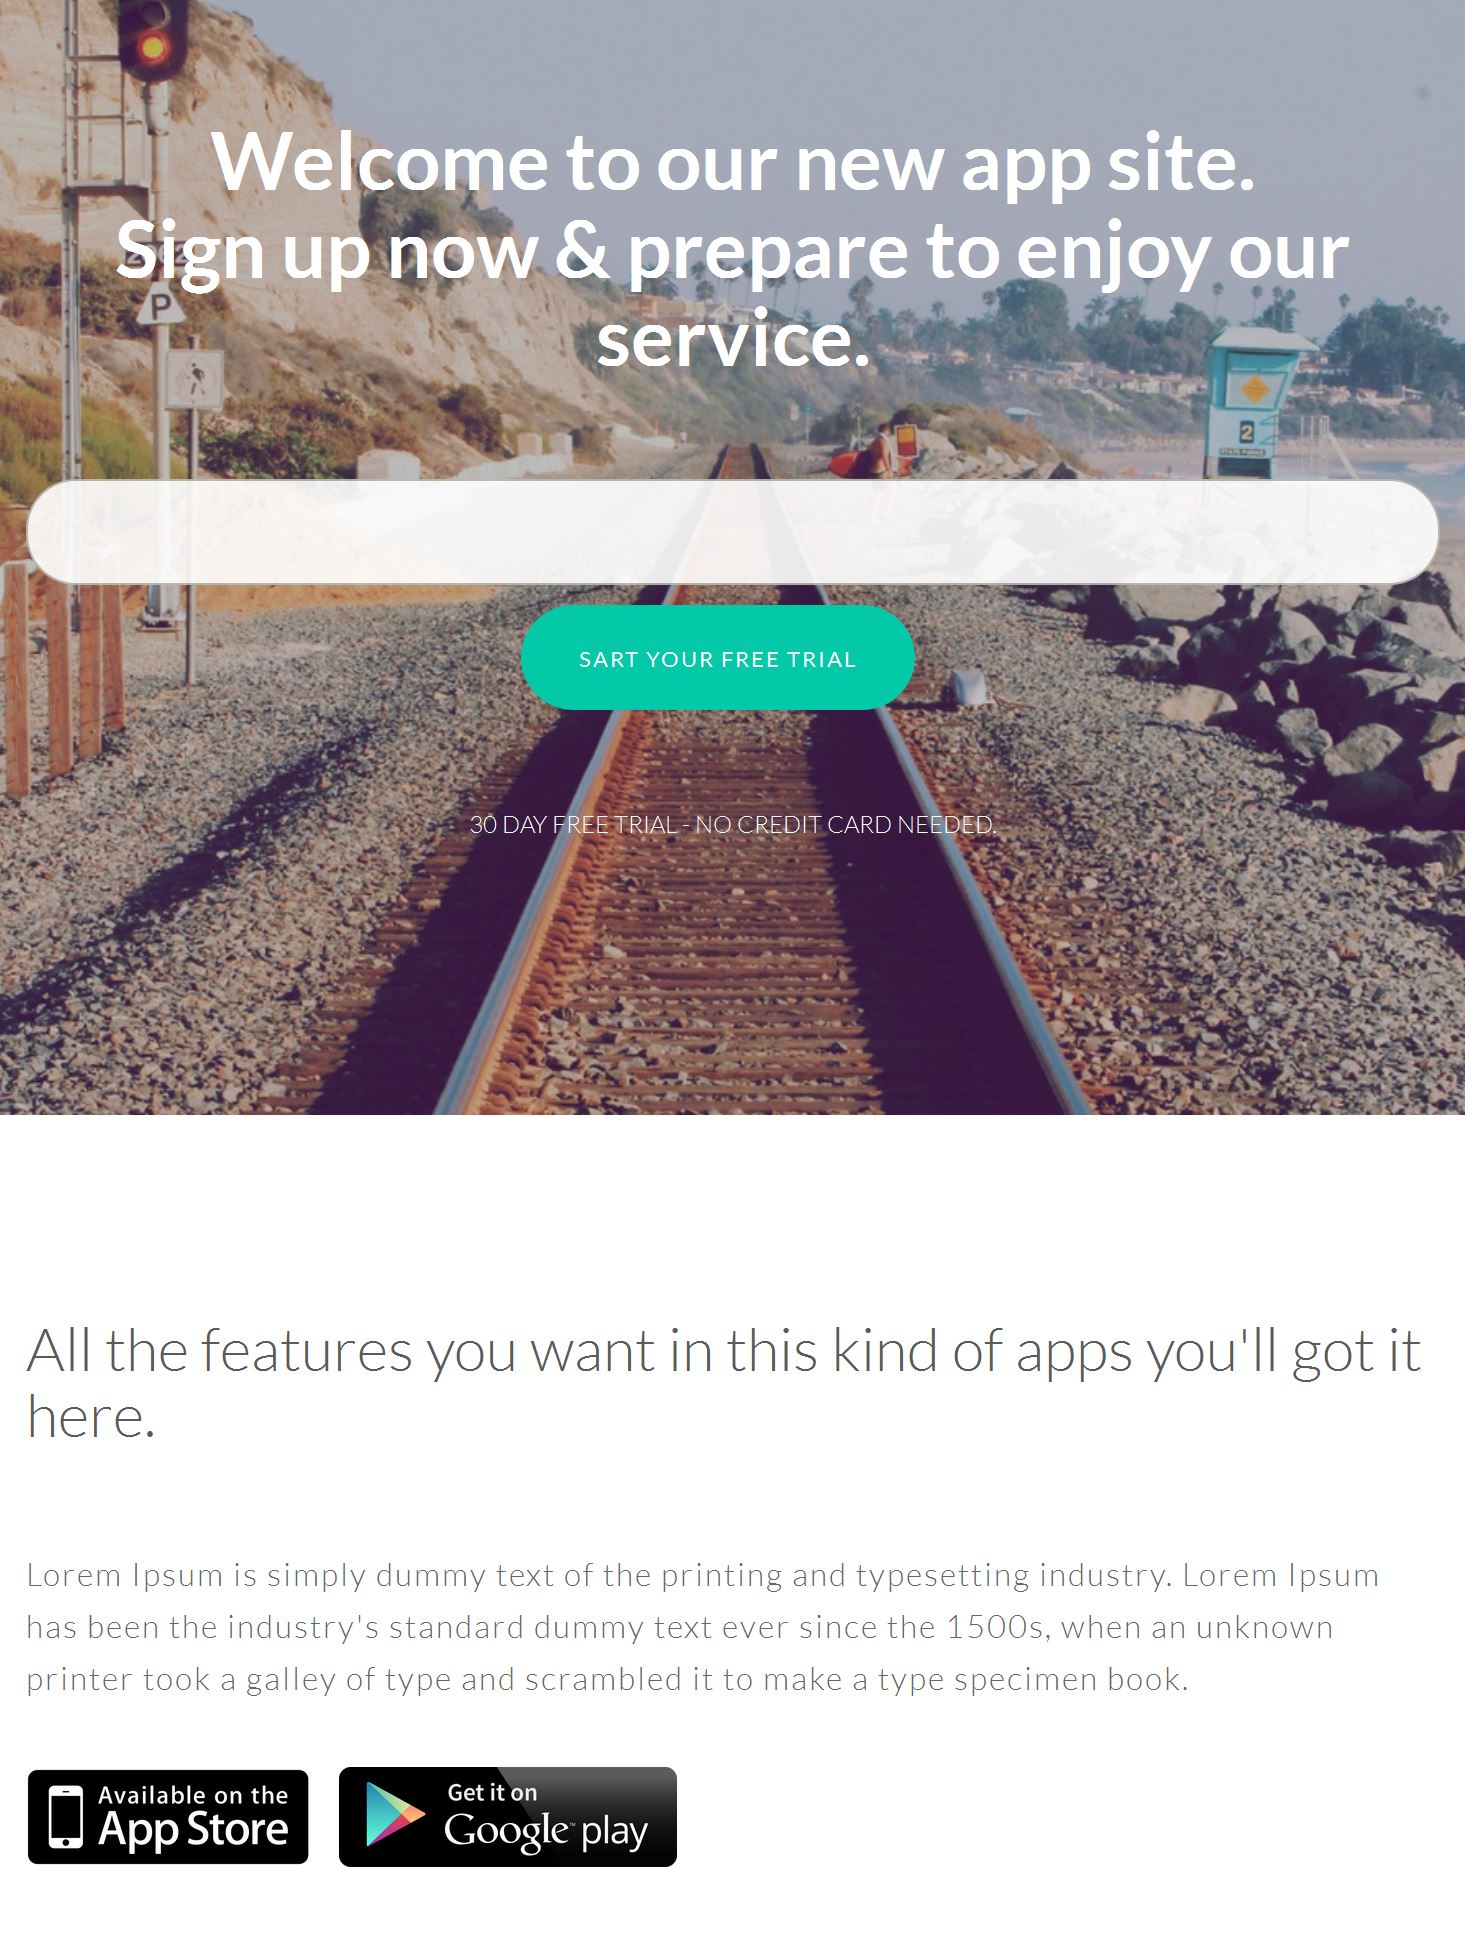 Bootstrap Application Template